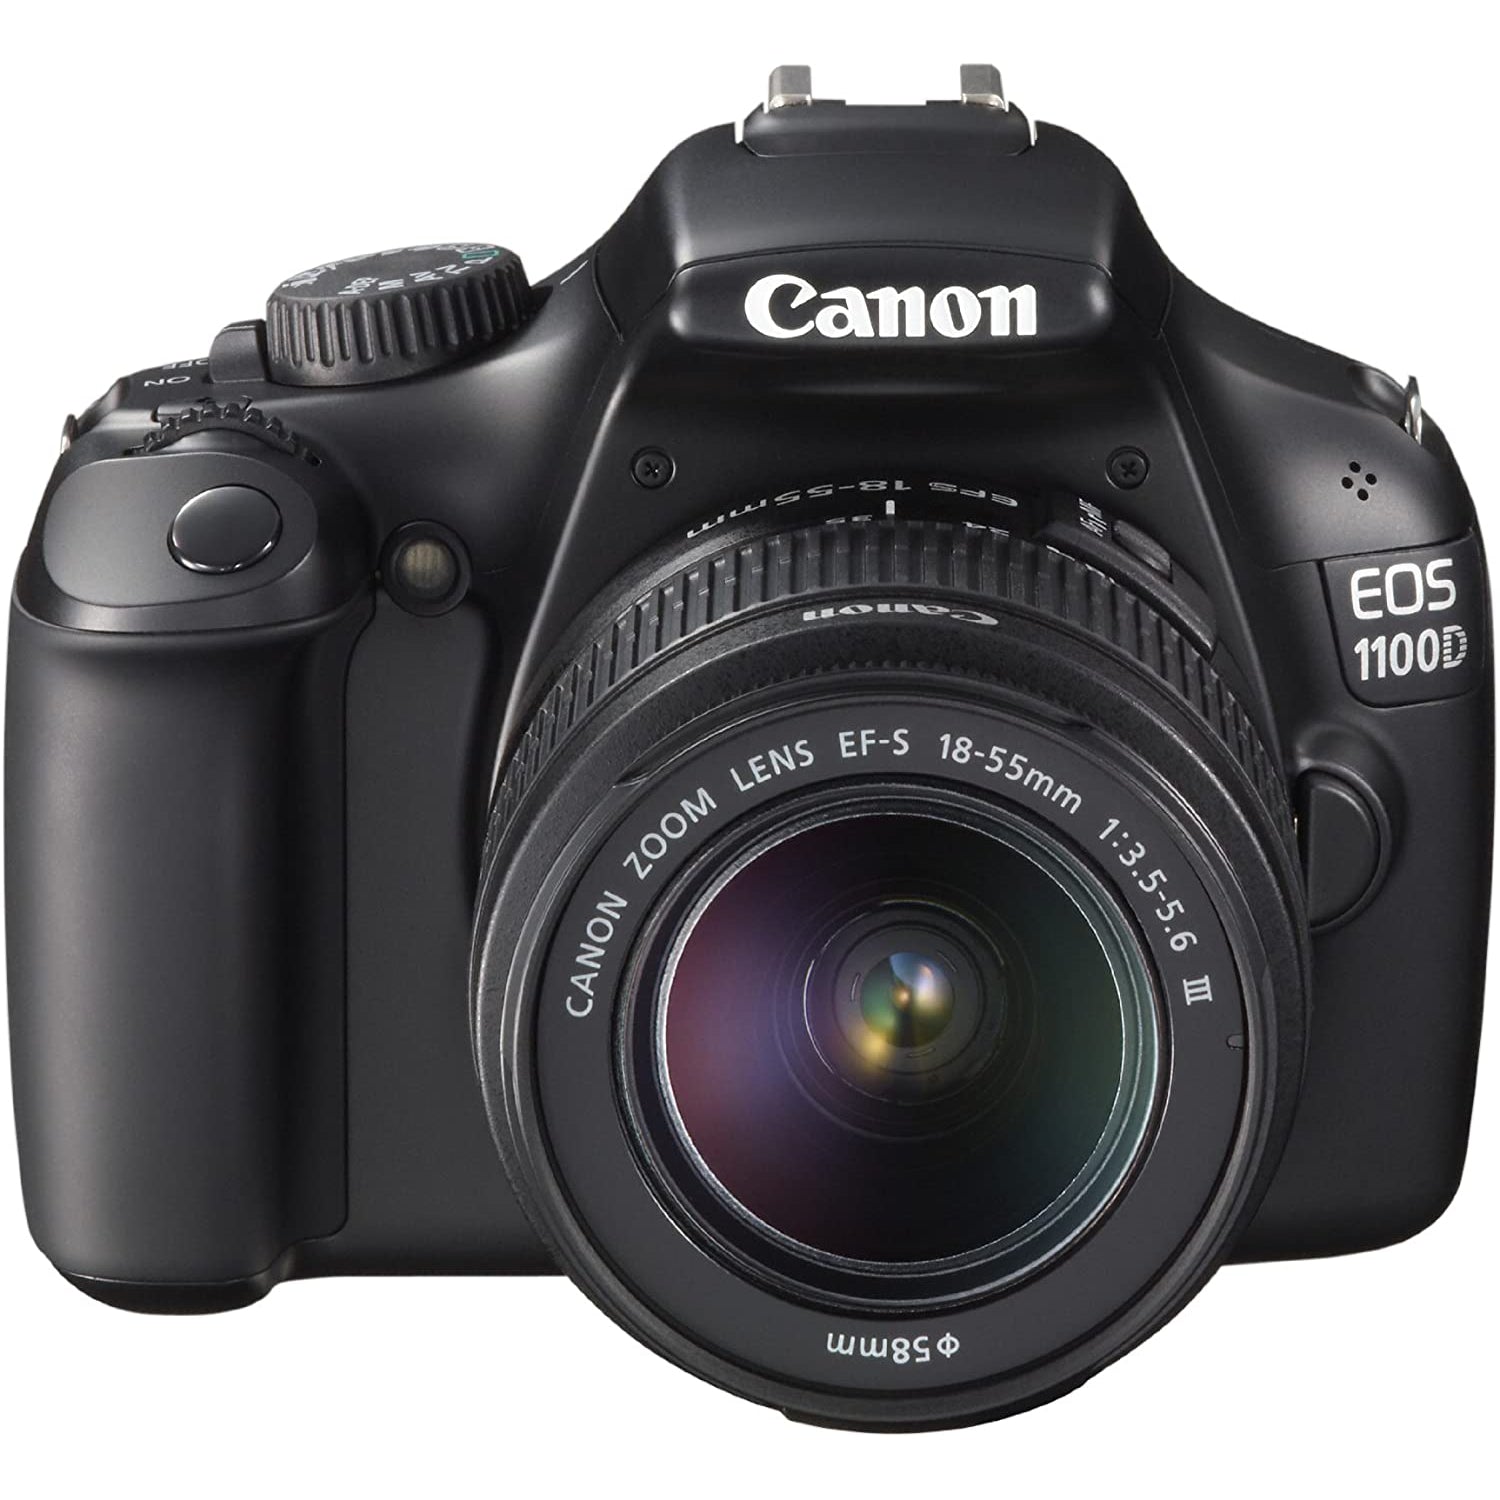 Canon EOS 1100D Camera - Black - CAMERA ONLY NO LENS INCLUDED